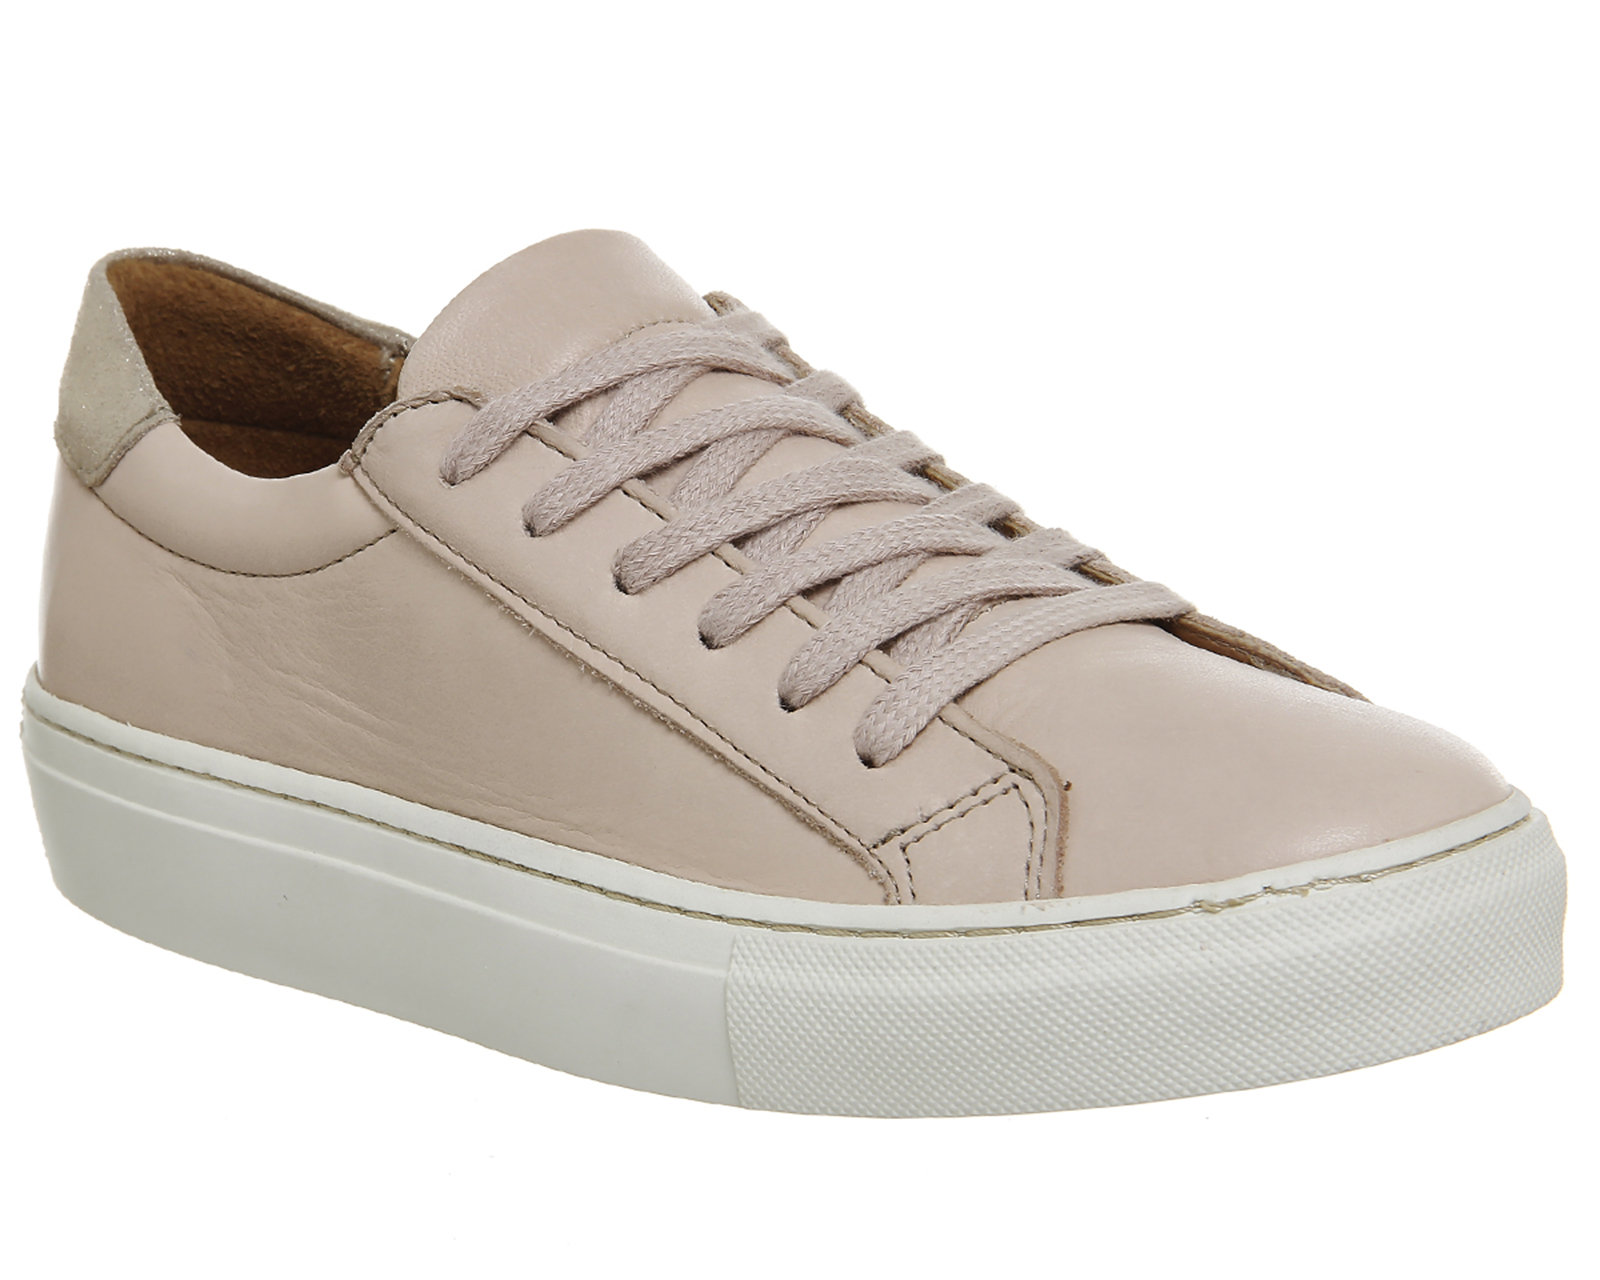 Trainer Nude Leather - Hers trainers